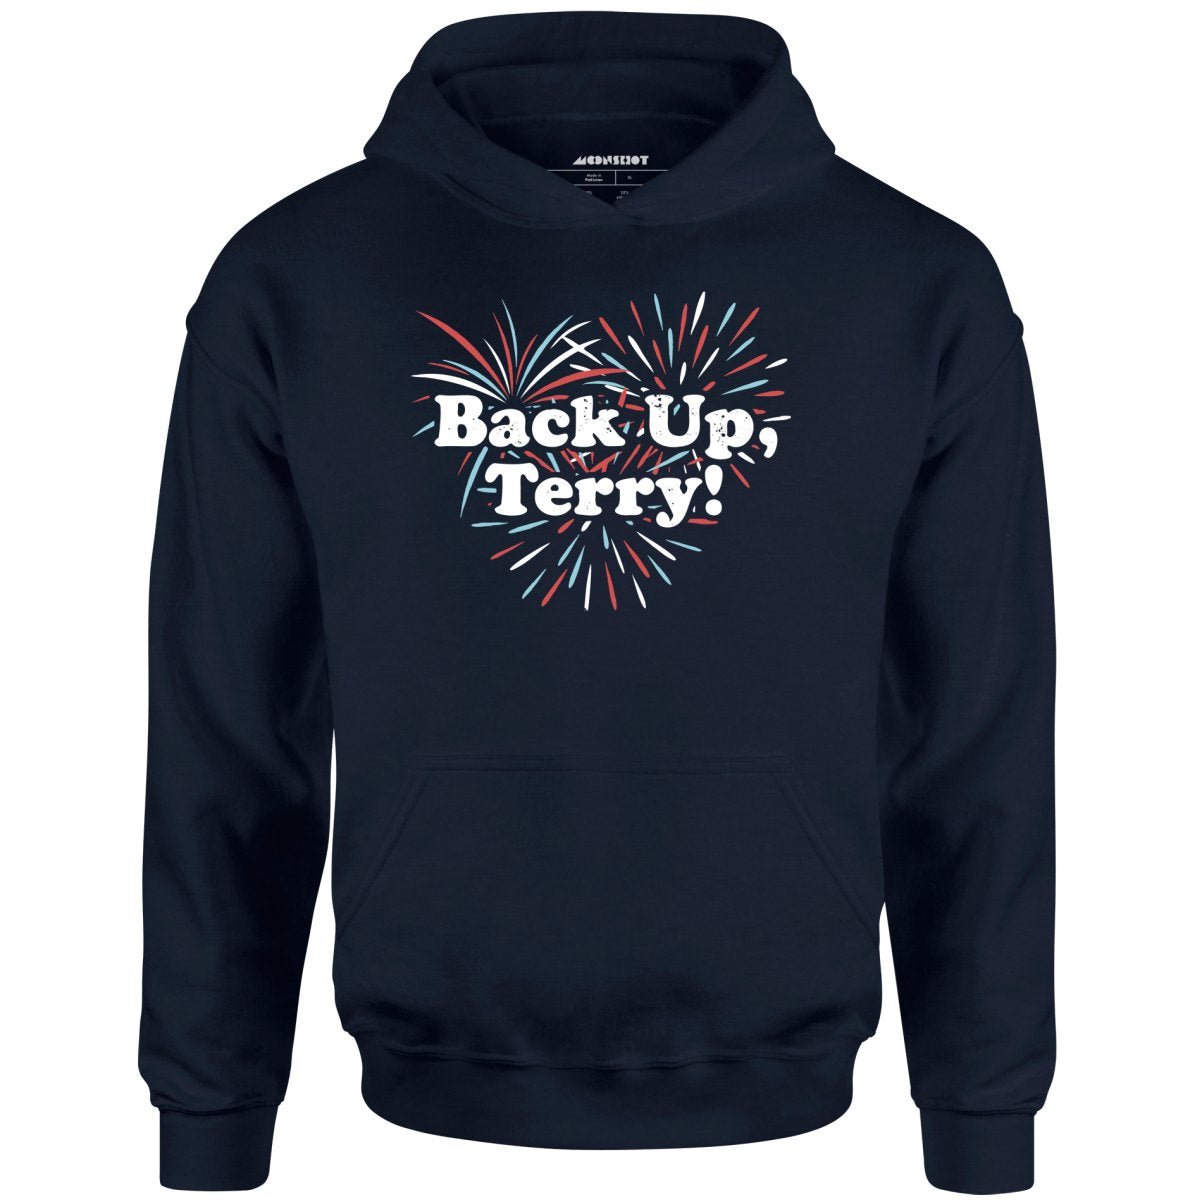 Back Up, Terry! - Unisex Hoodie